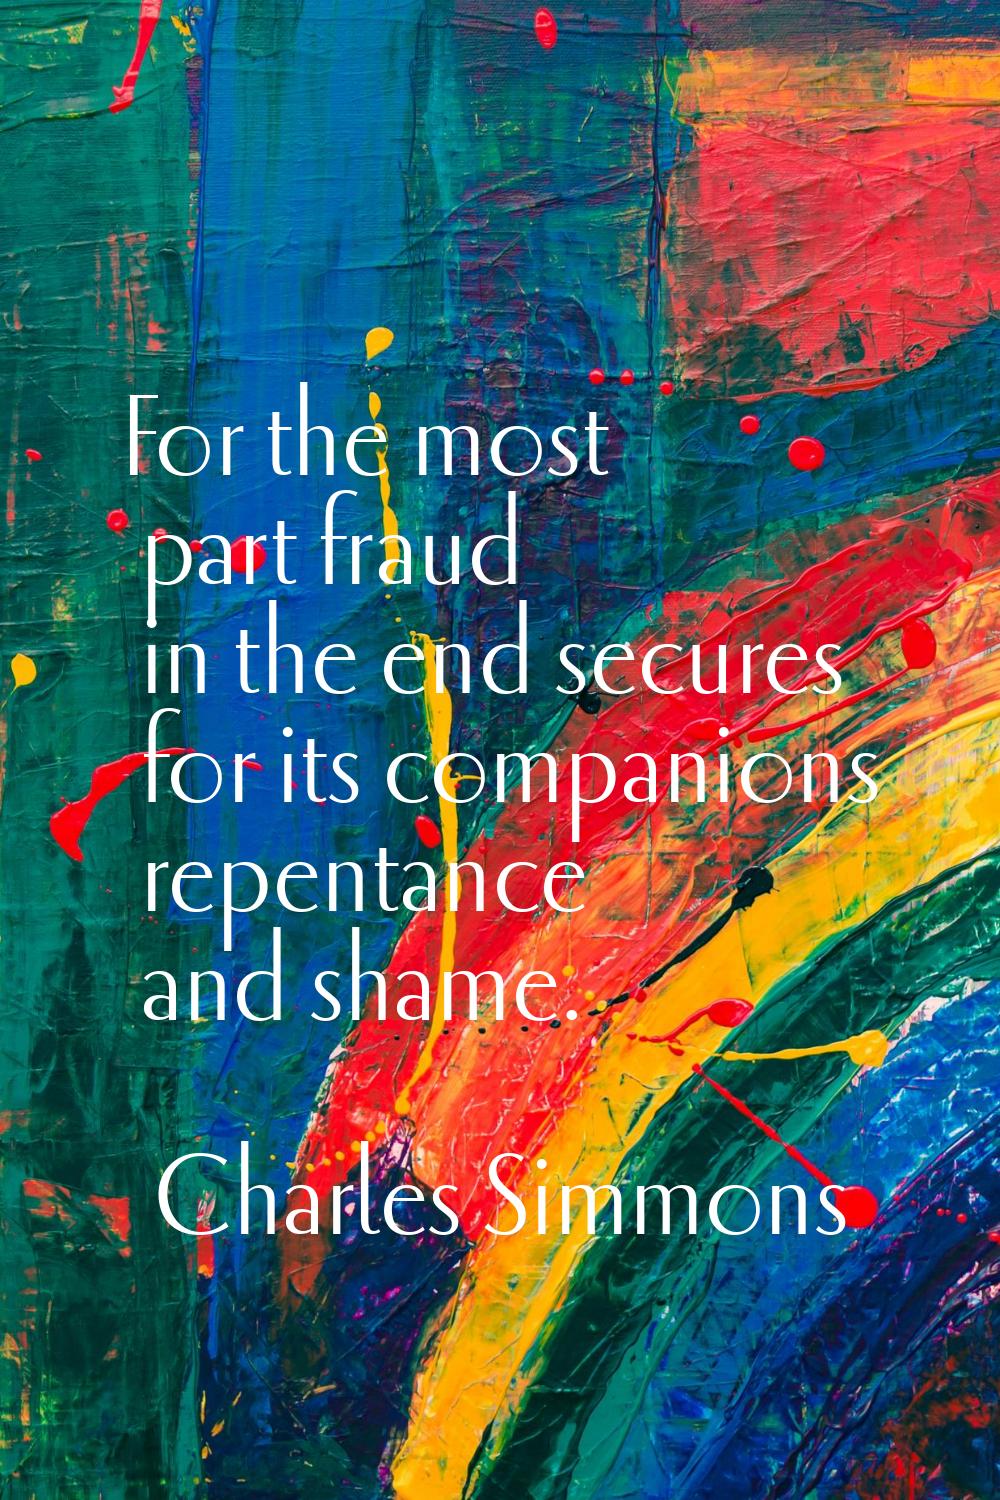 For the most part fraud in the end secures for its companions repentance and shame.